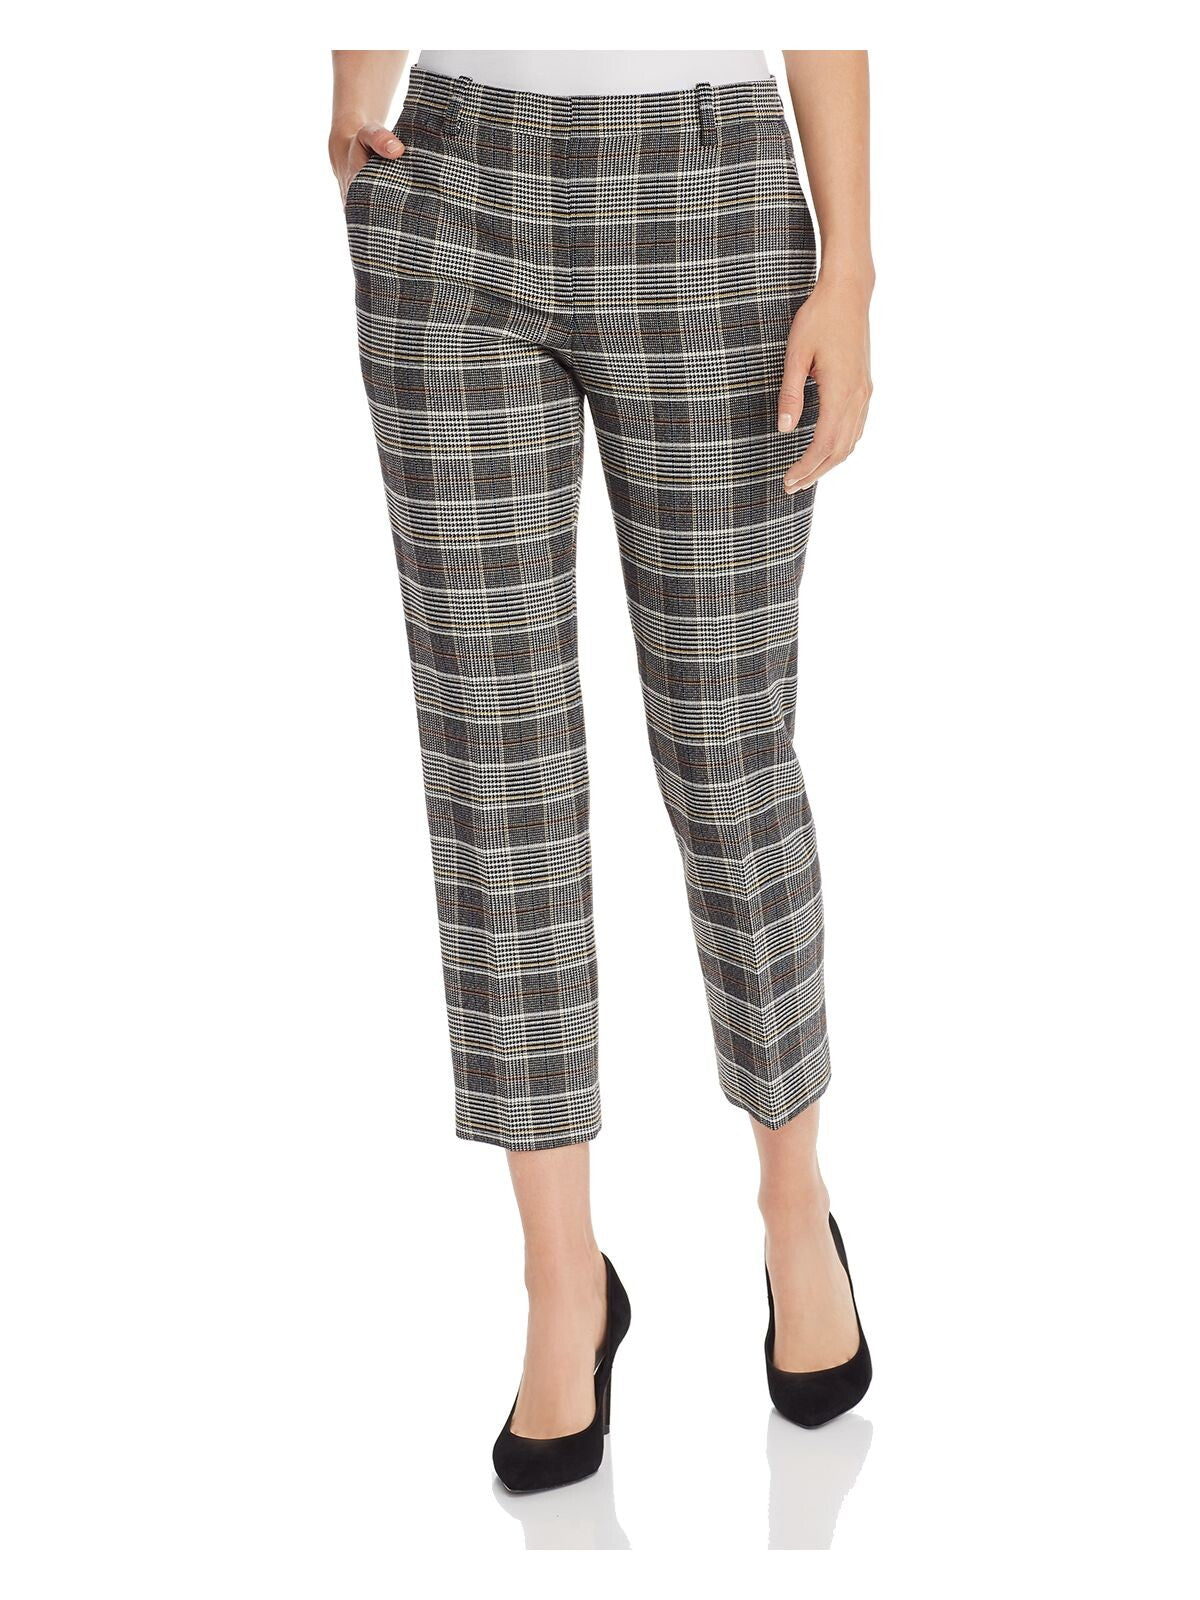 THEORY Womens Black Zippered Plaid Wear To Work Cropped Pants 12